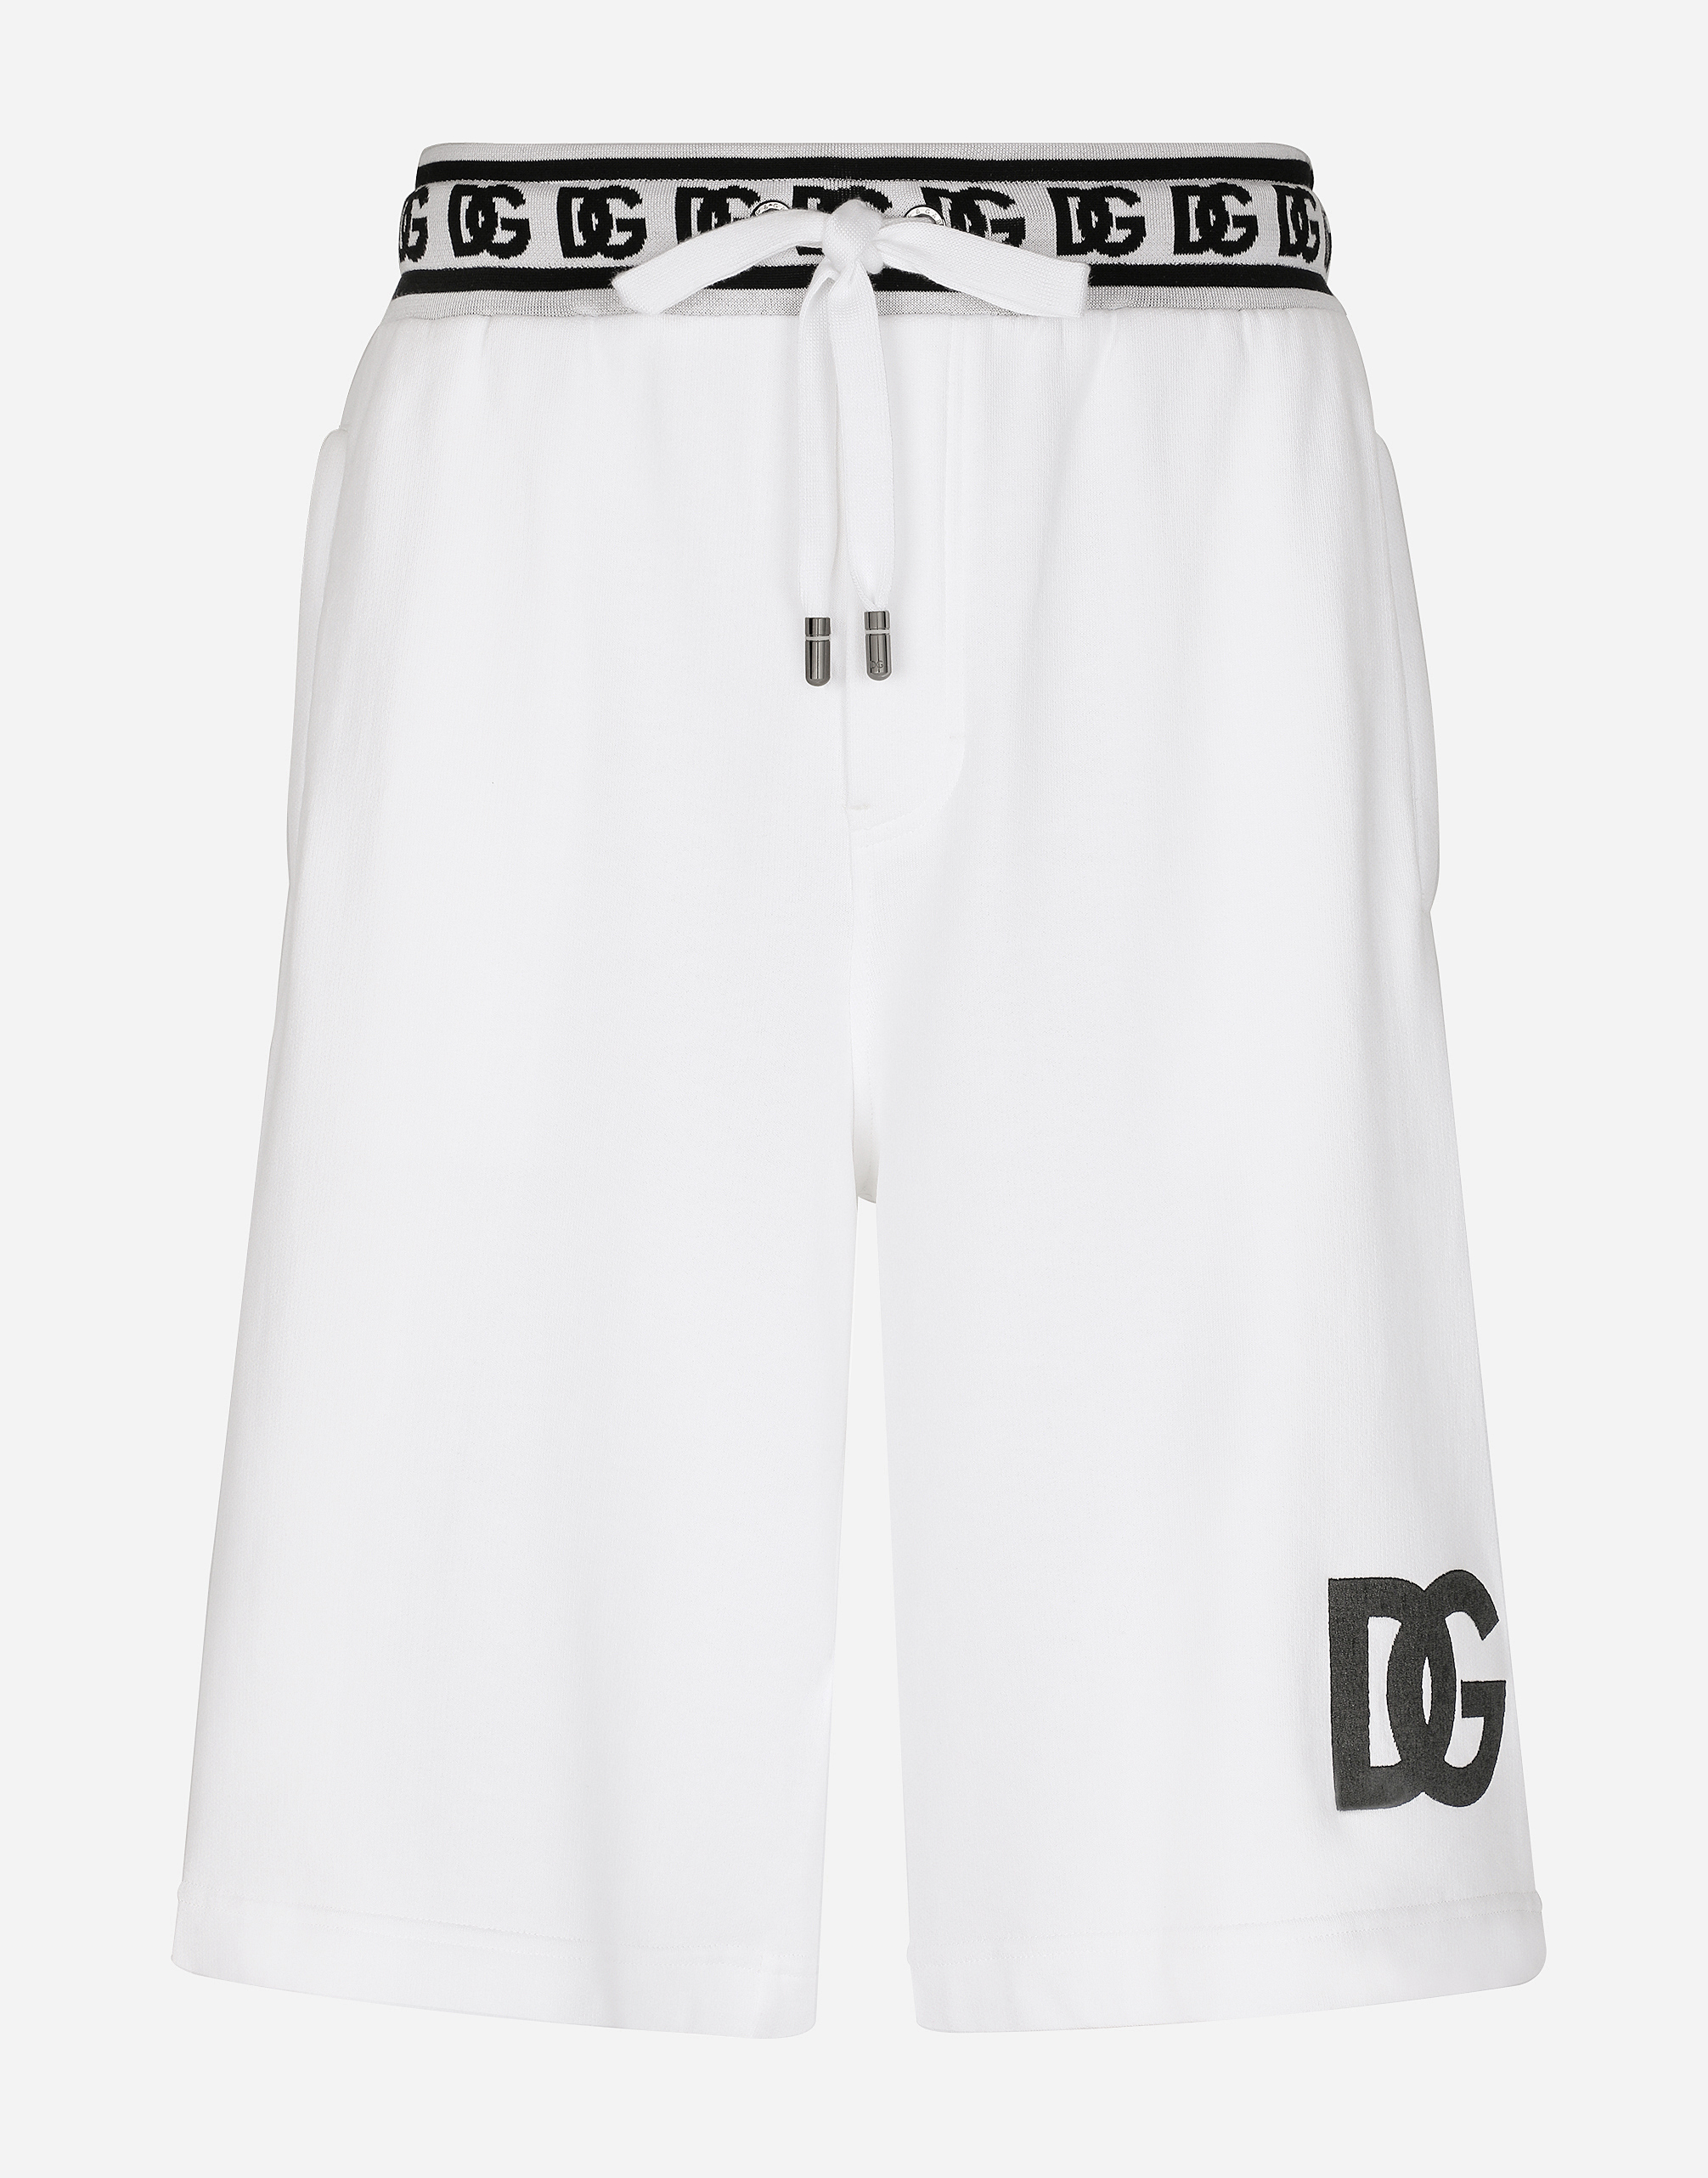 Dolce & Gabbana Jogging Shorts With Dg Embroidery And Dg Monogram In White